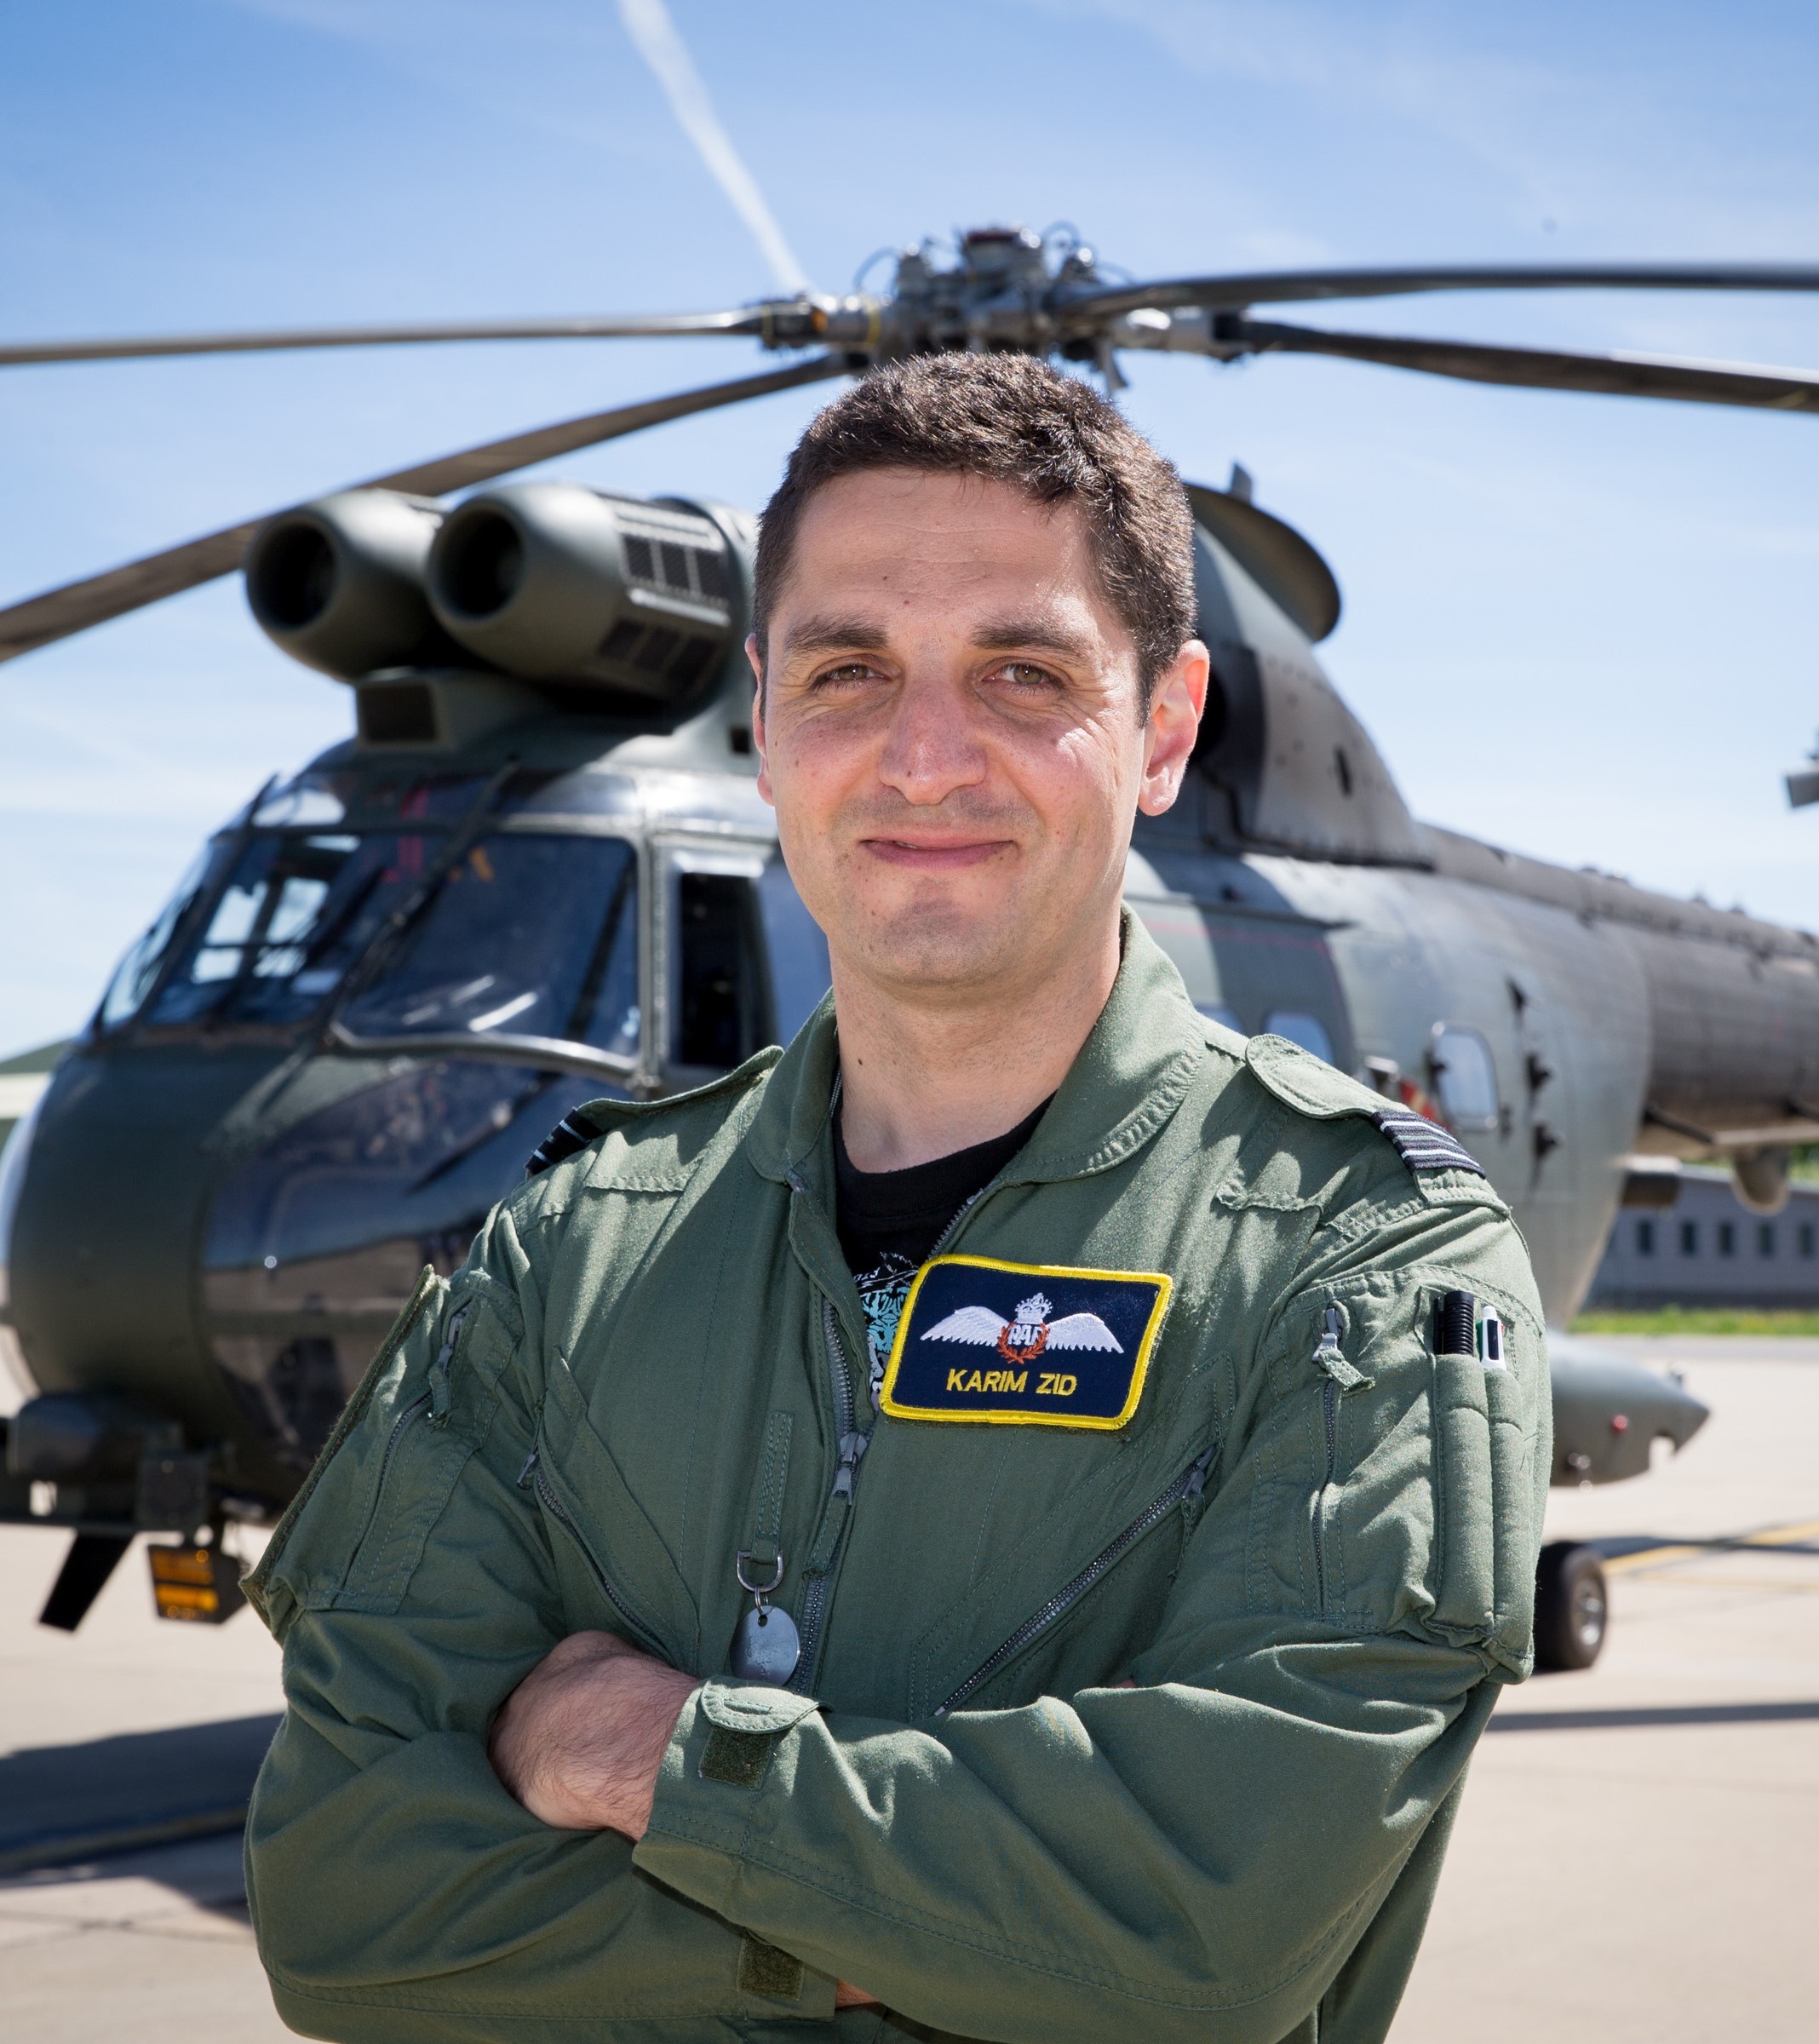 Sqn Leader Karim Zid stood in front of a Puma helicopter.